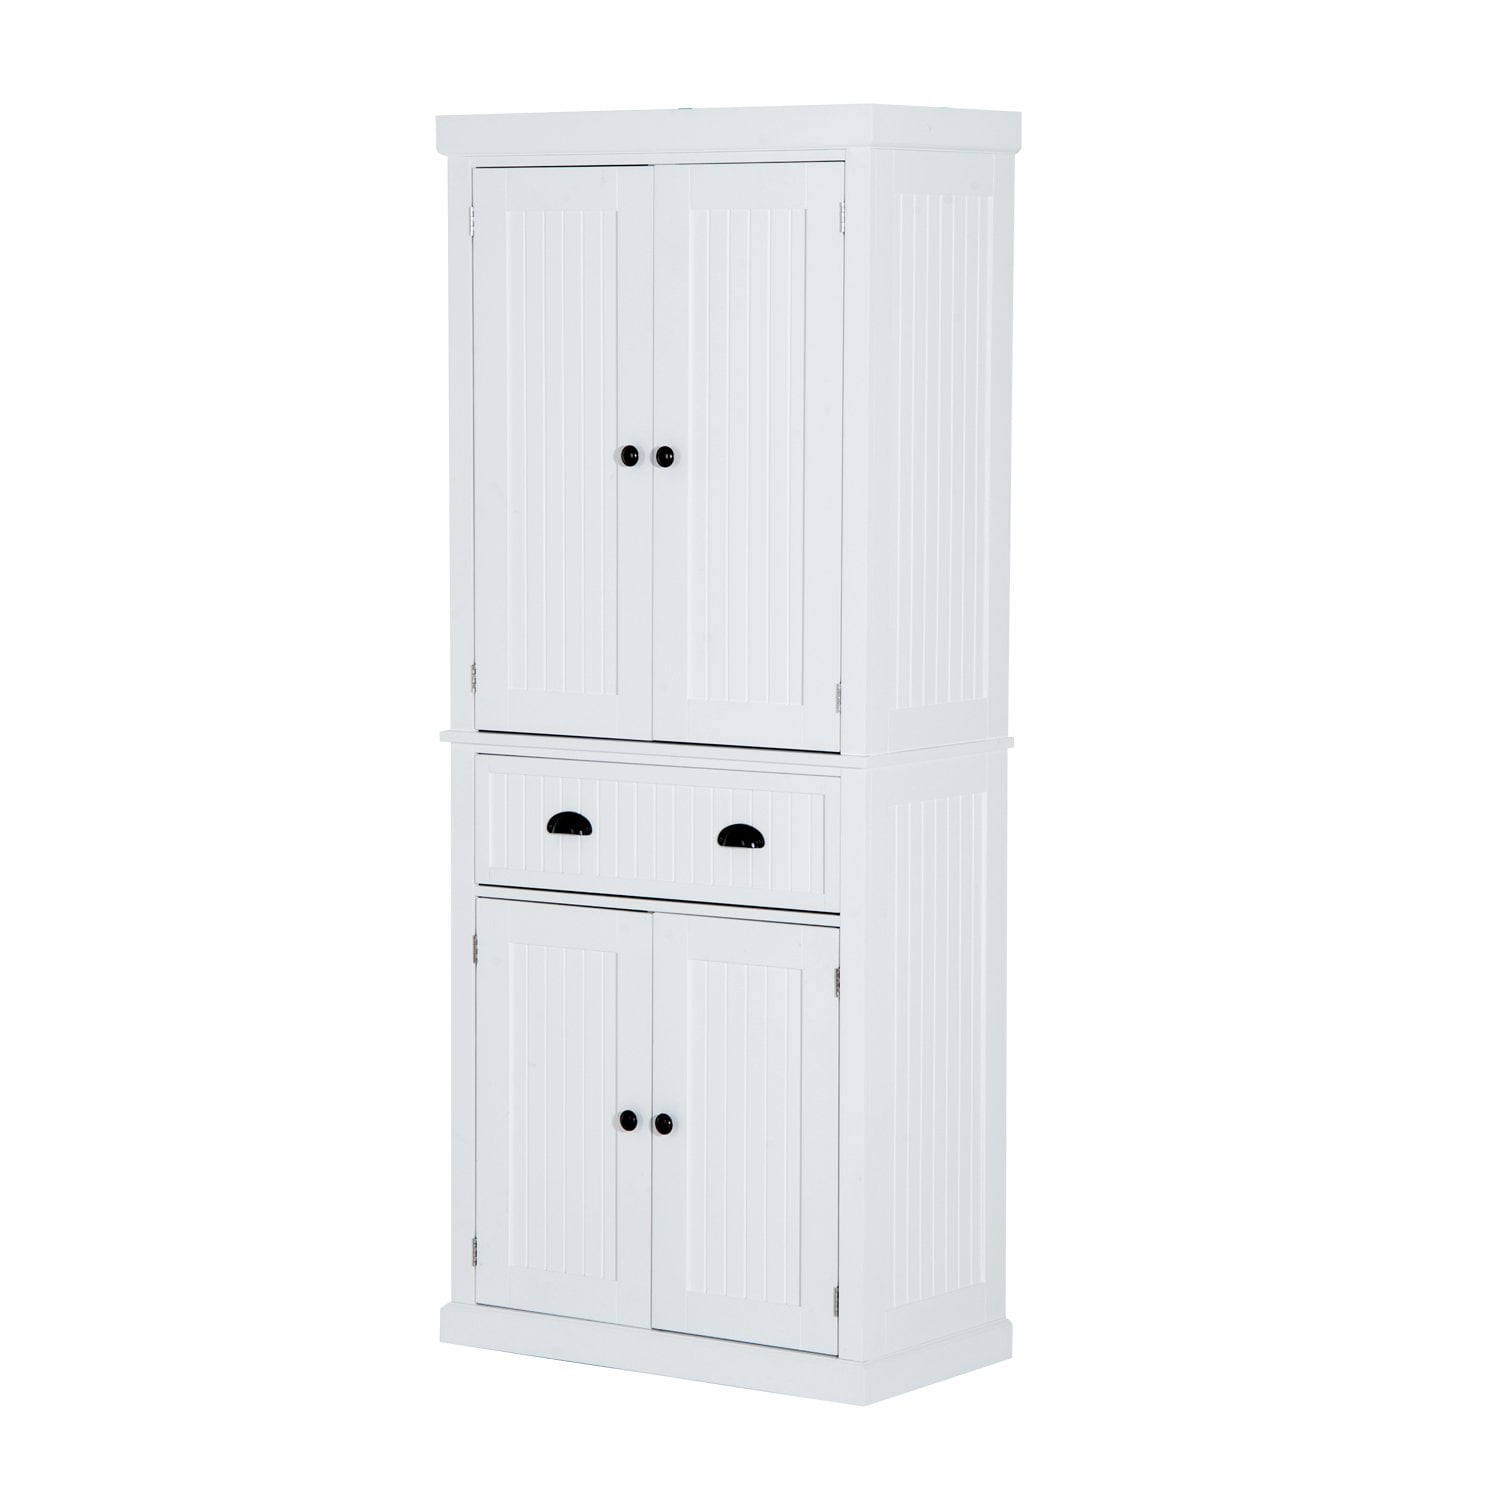 YOLENY Kitchen Pantry Elegant Colonial Design Cabinet Cupboard with 3 Adjustable Shelves and 1 Storage Drawer,White 72” Freestanding Storage Cabinets with Doors and Shelves